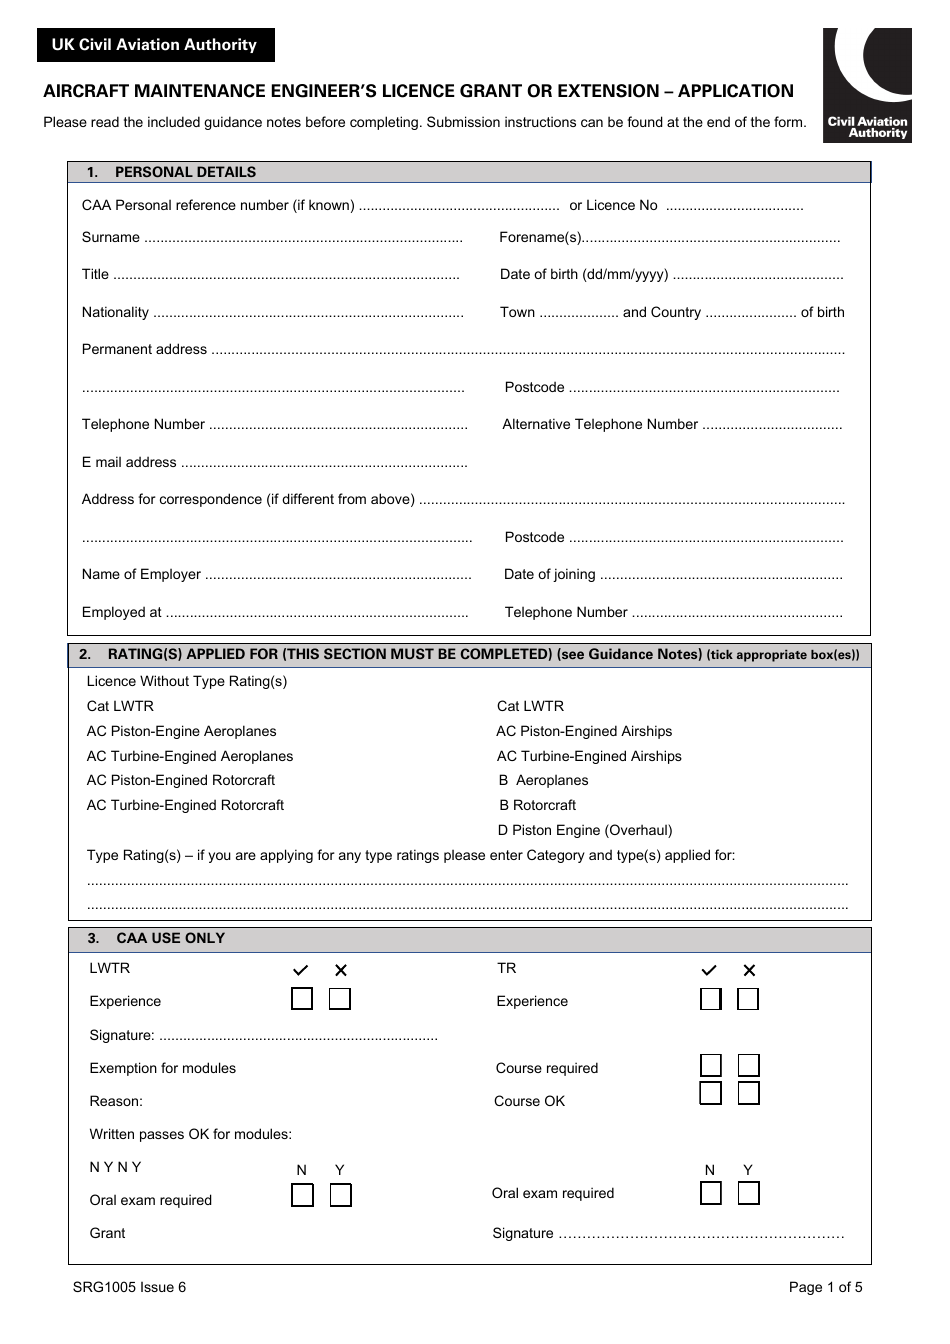 Form SRG1005 Aircr Aft Maintenance Engineers Licence Grant or Extension - Application - United Kingdom, Page 1